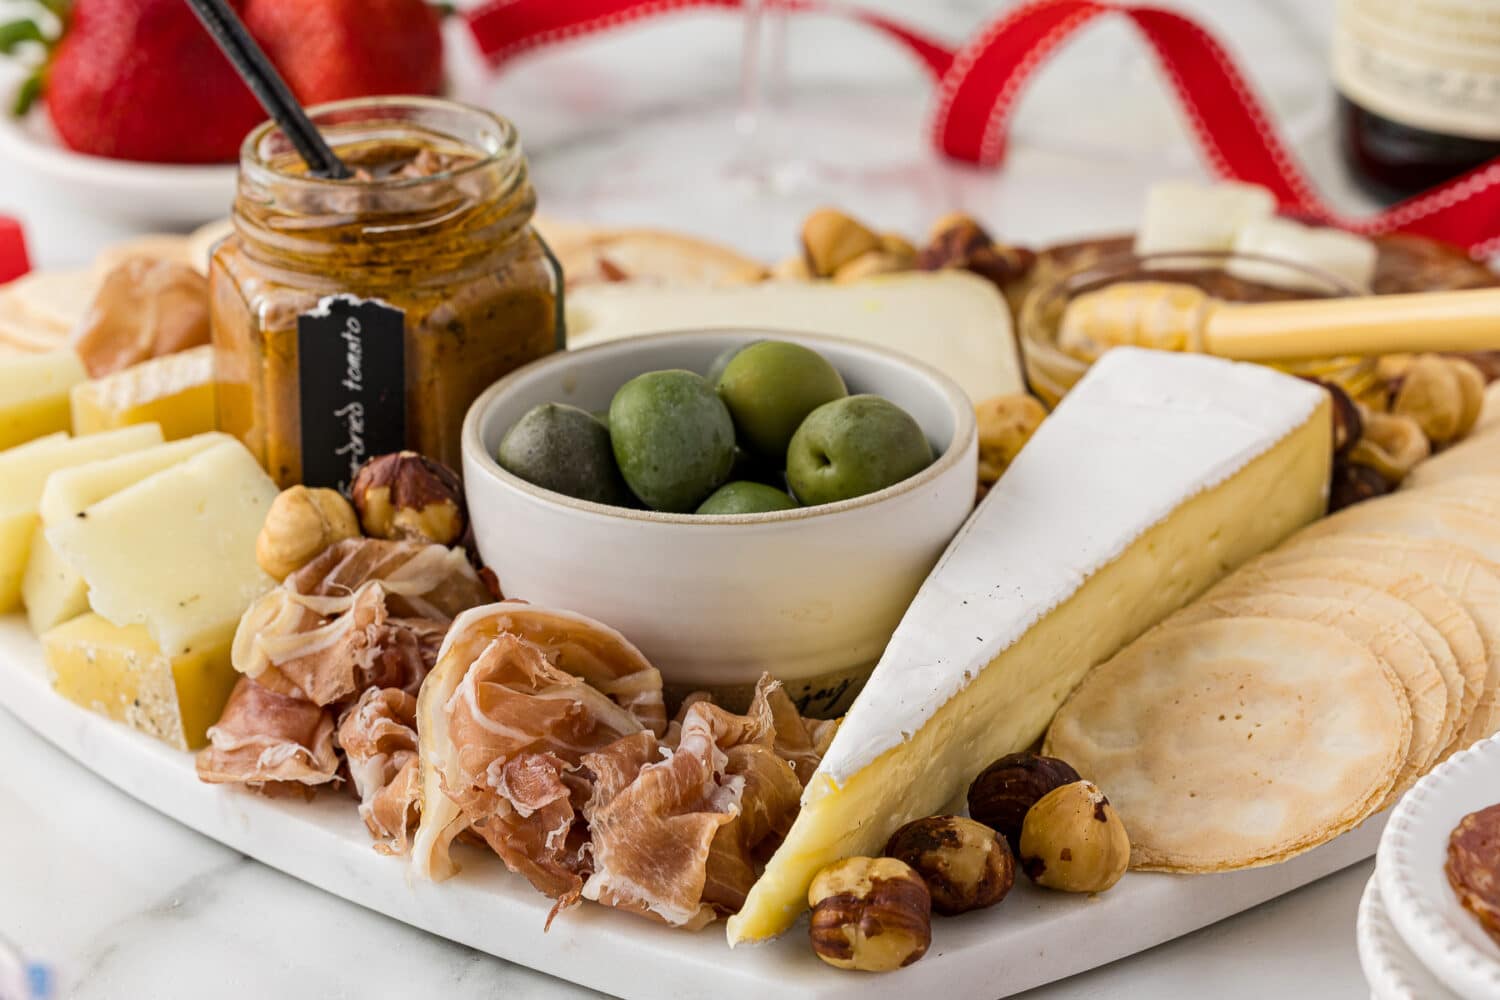 Close up of party food on a party charcuterie board platter including meats, cheese and crackers and olives